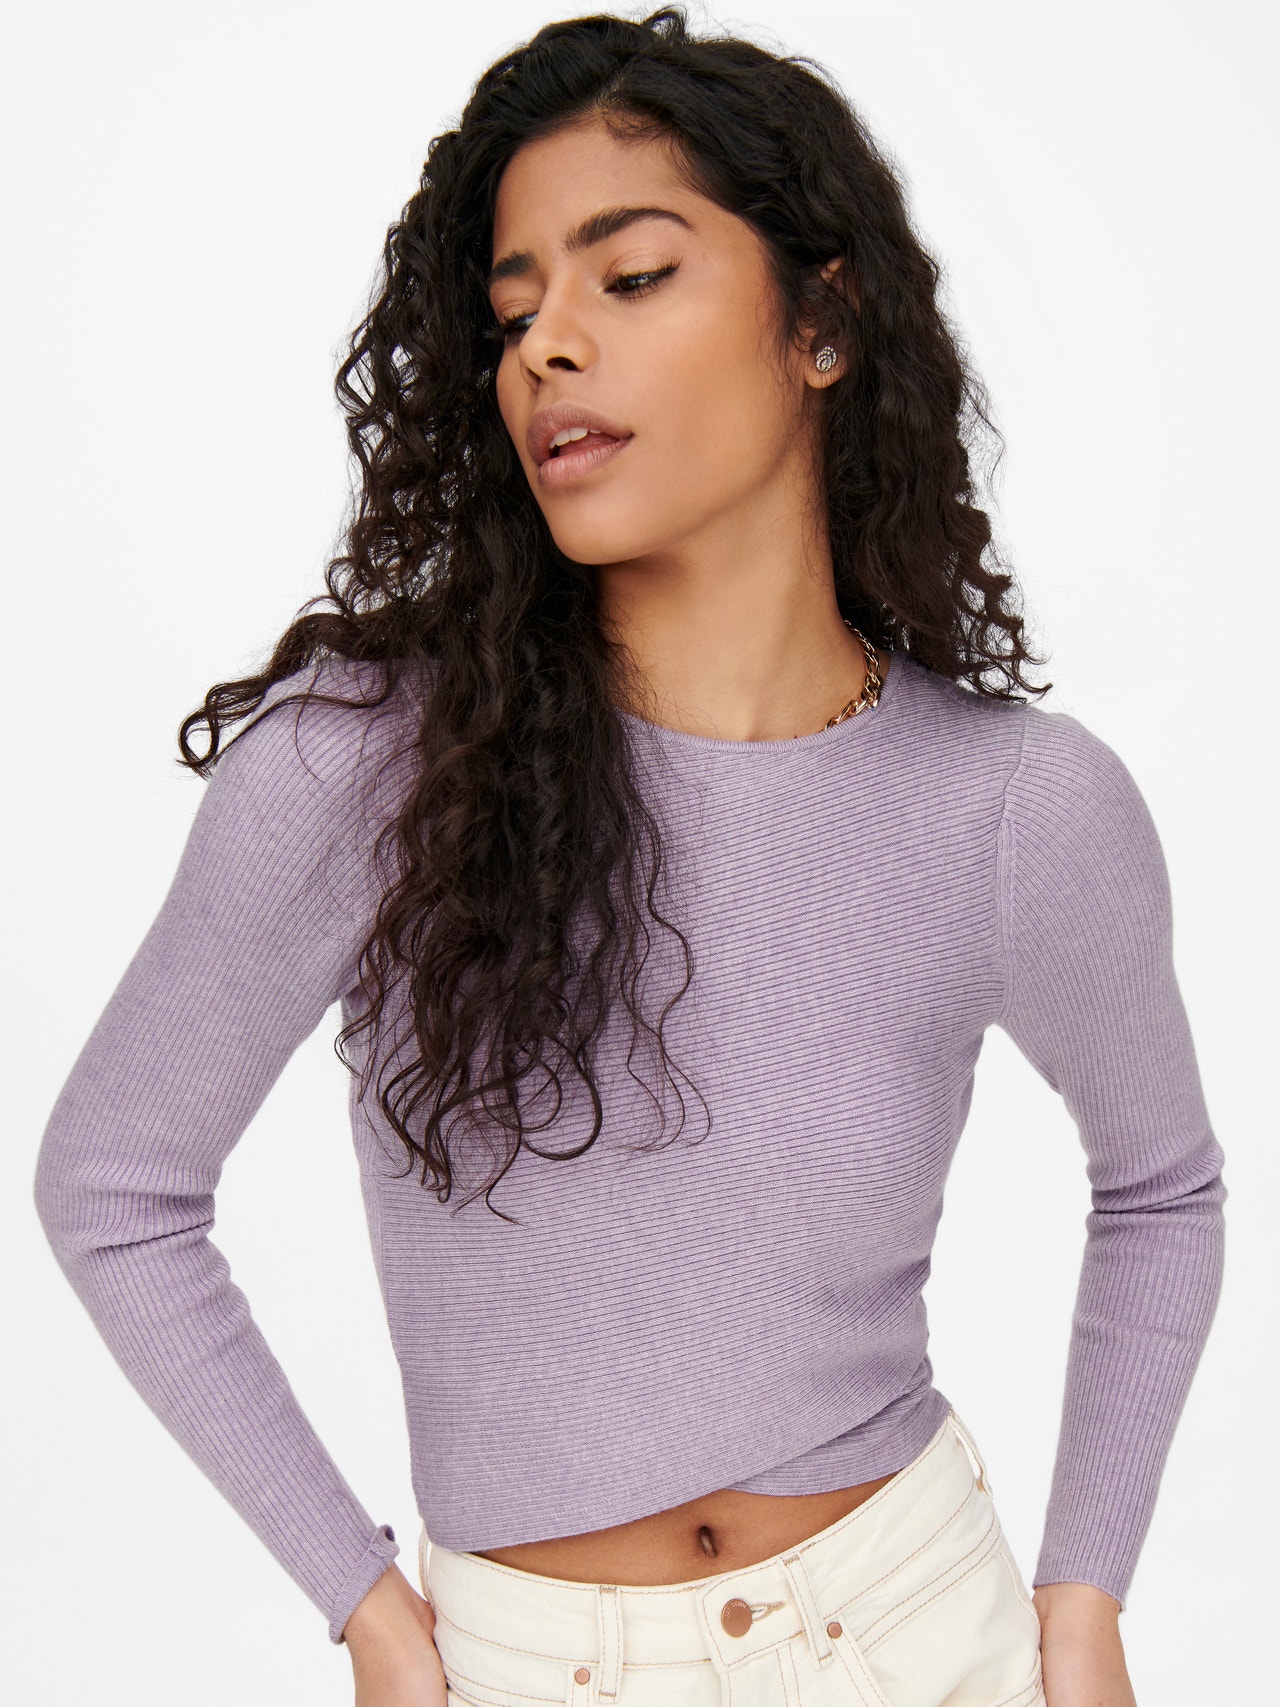 ONLY Knit Fit Rundhals Pullover -Pastel Lilac - 15250619